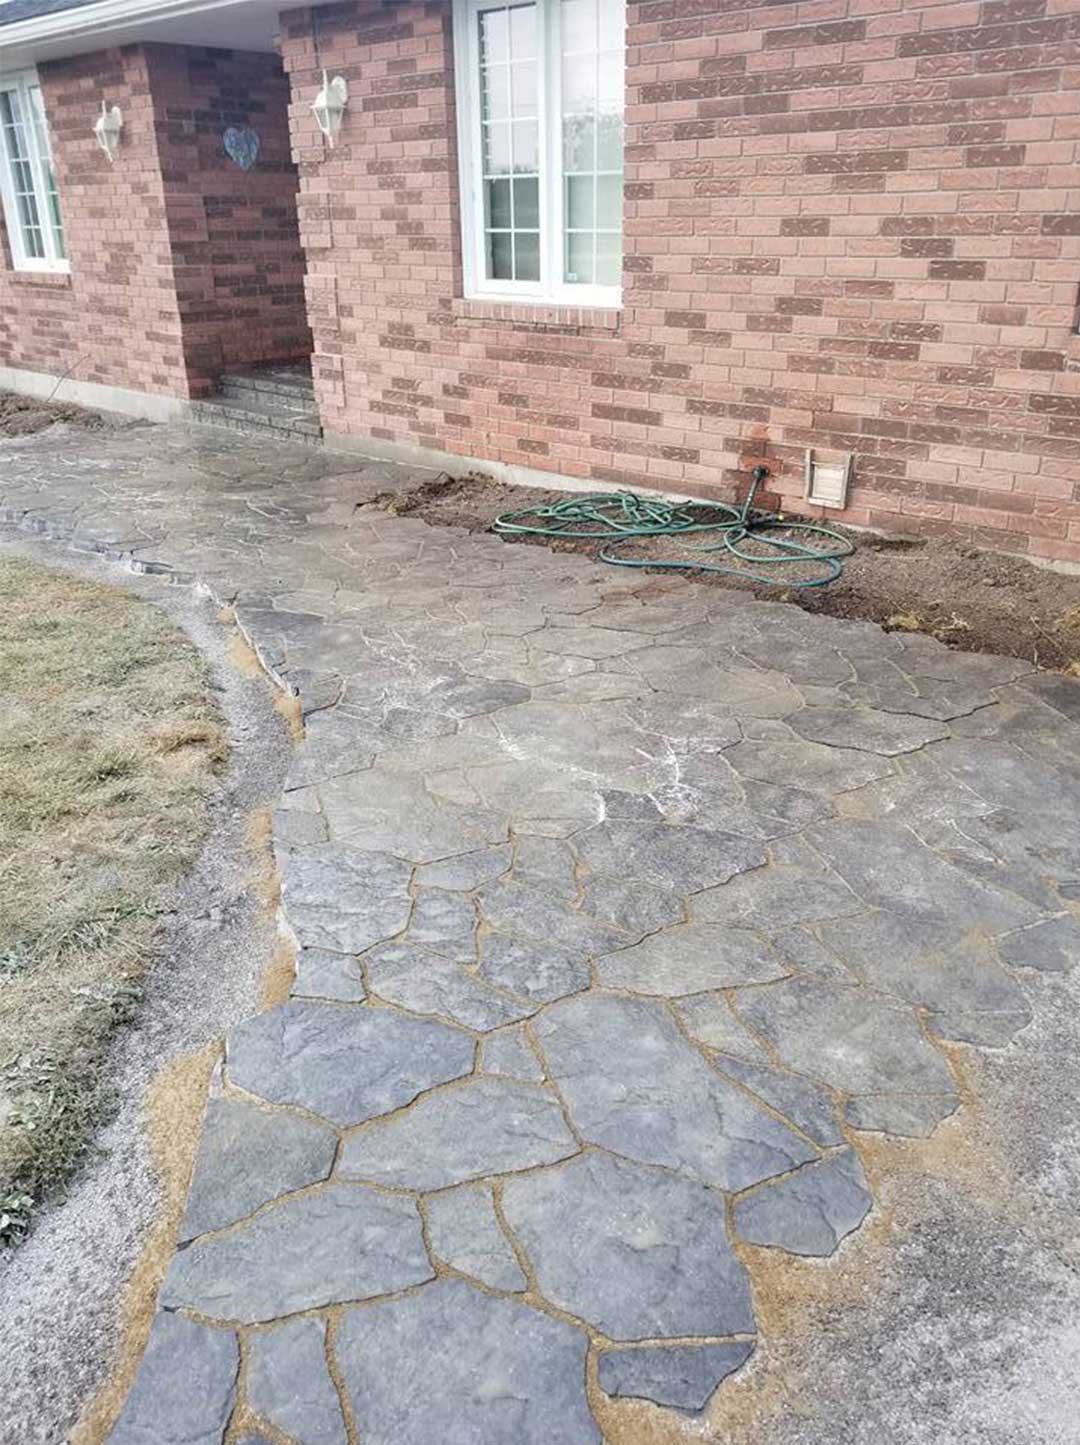 interlocking stone path leading to front door of residence